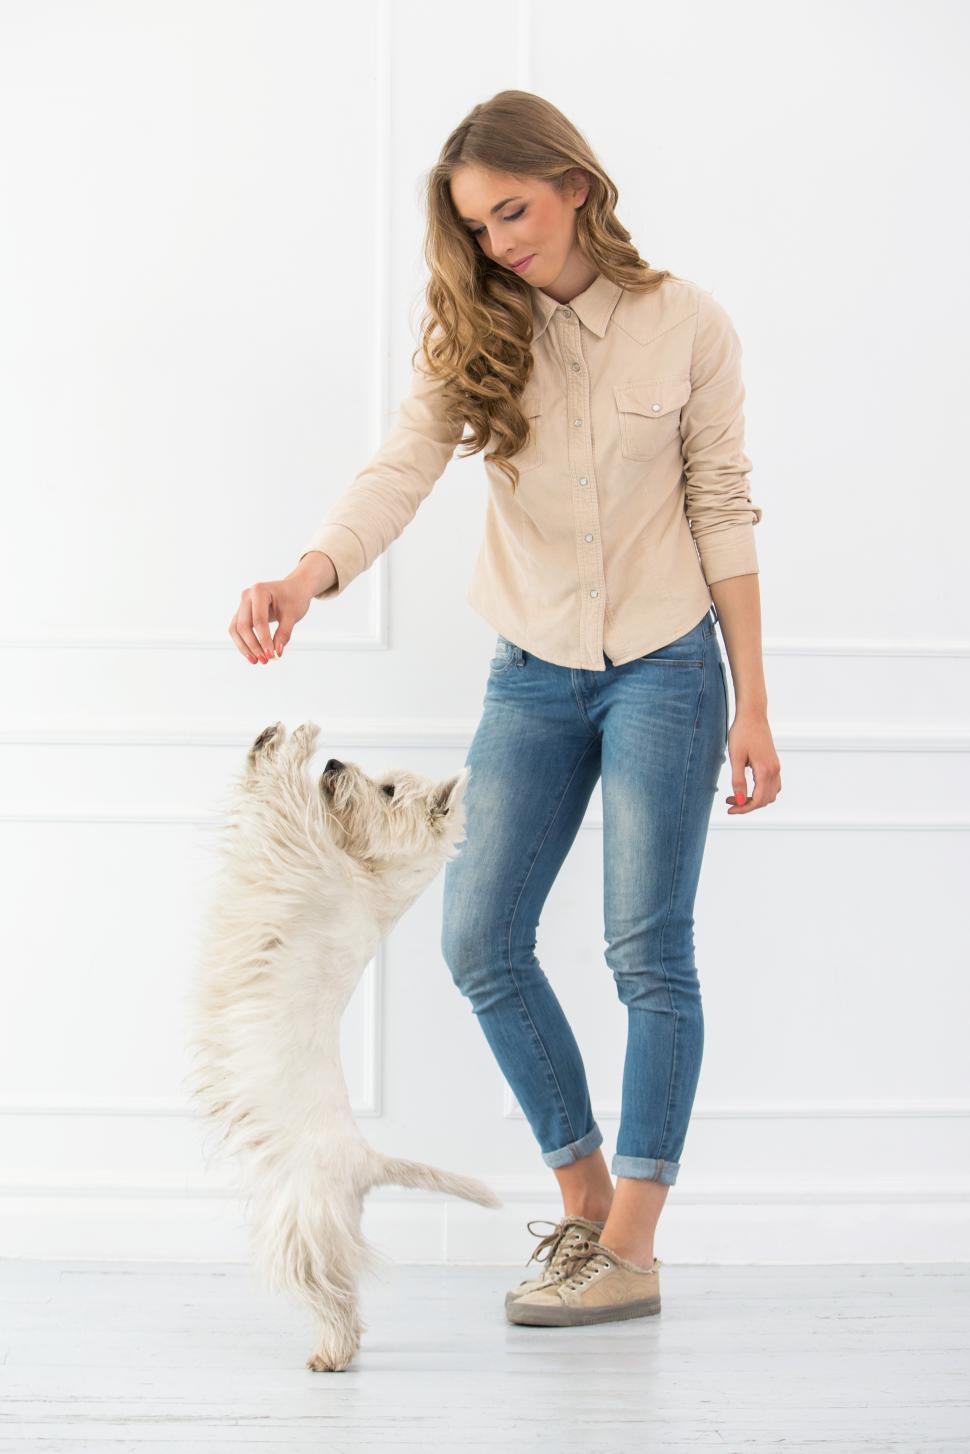 Free Image of Beautiful girl standing with dog 